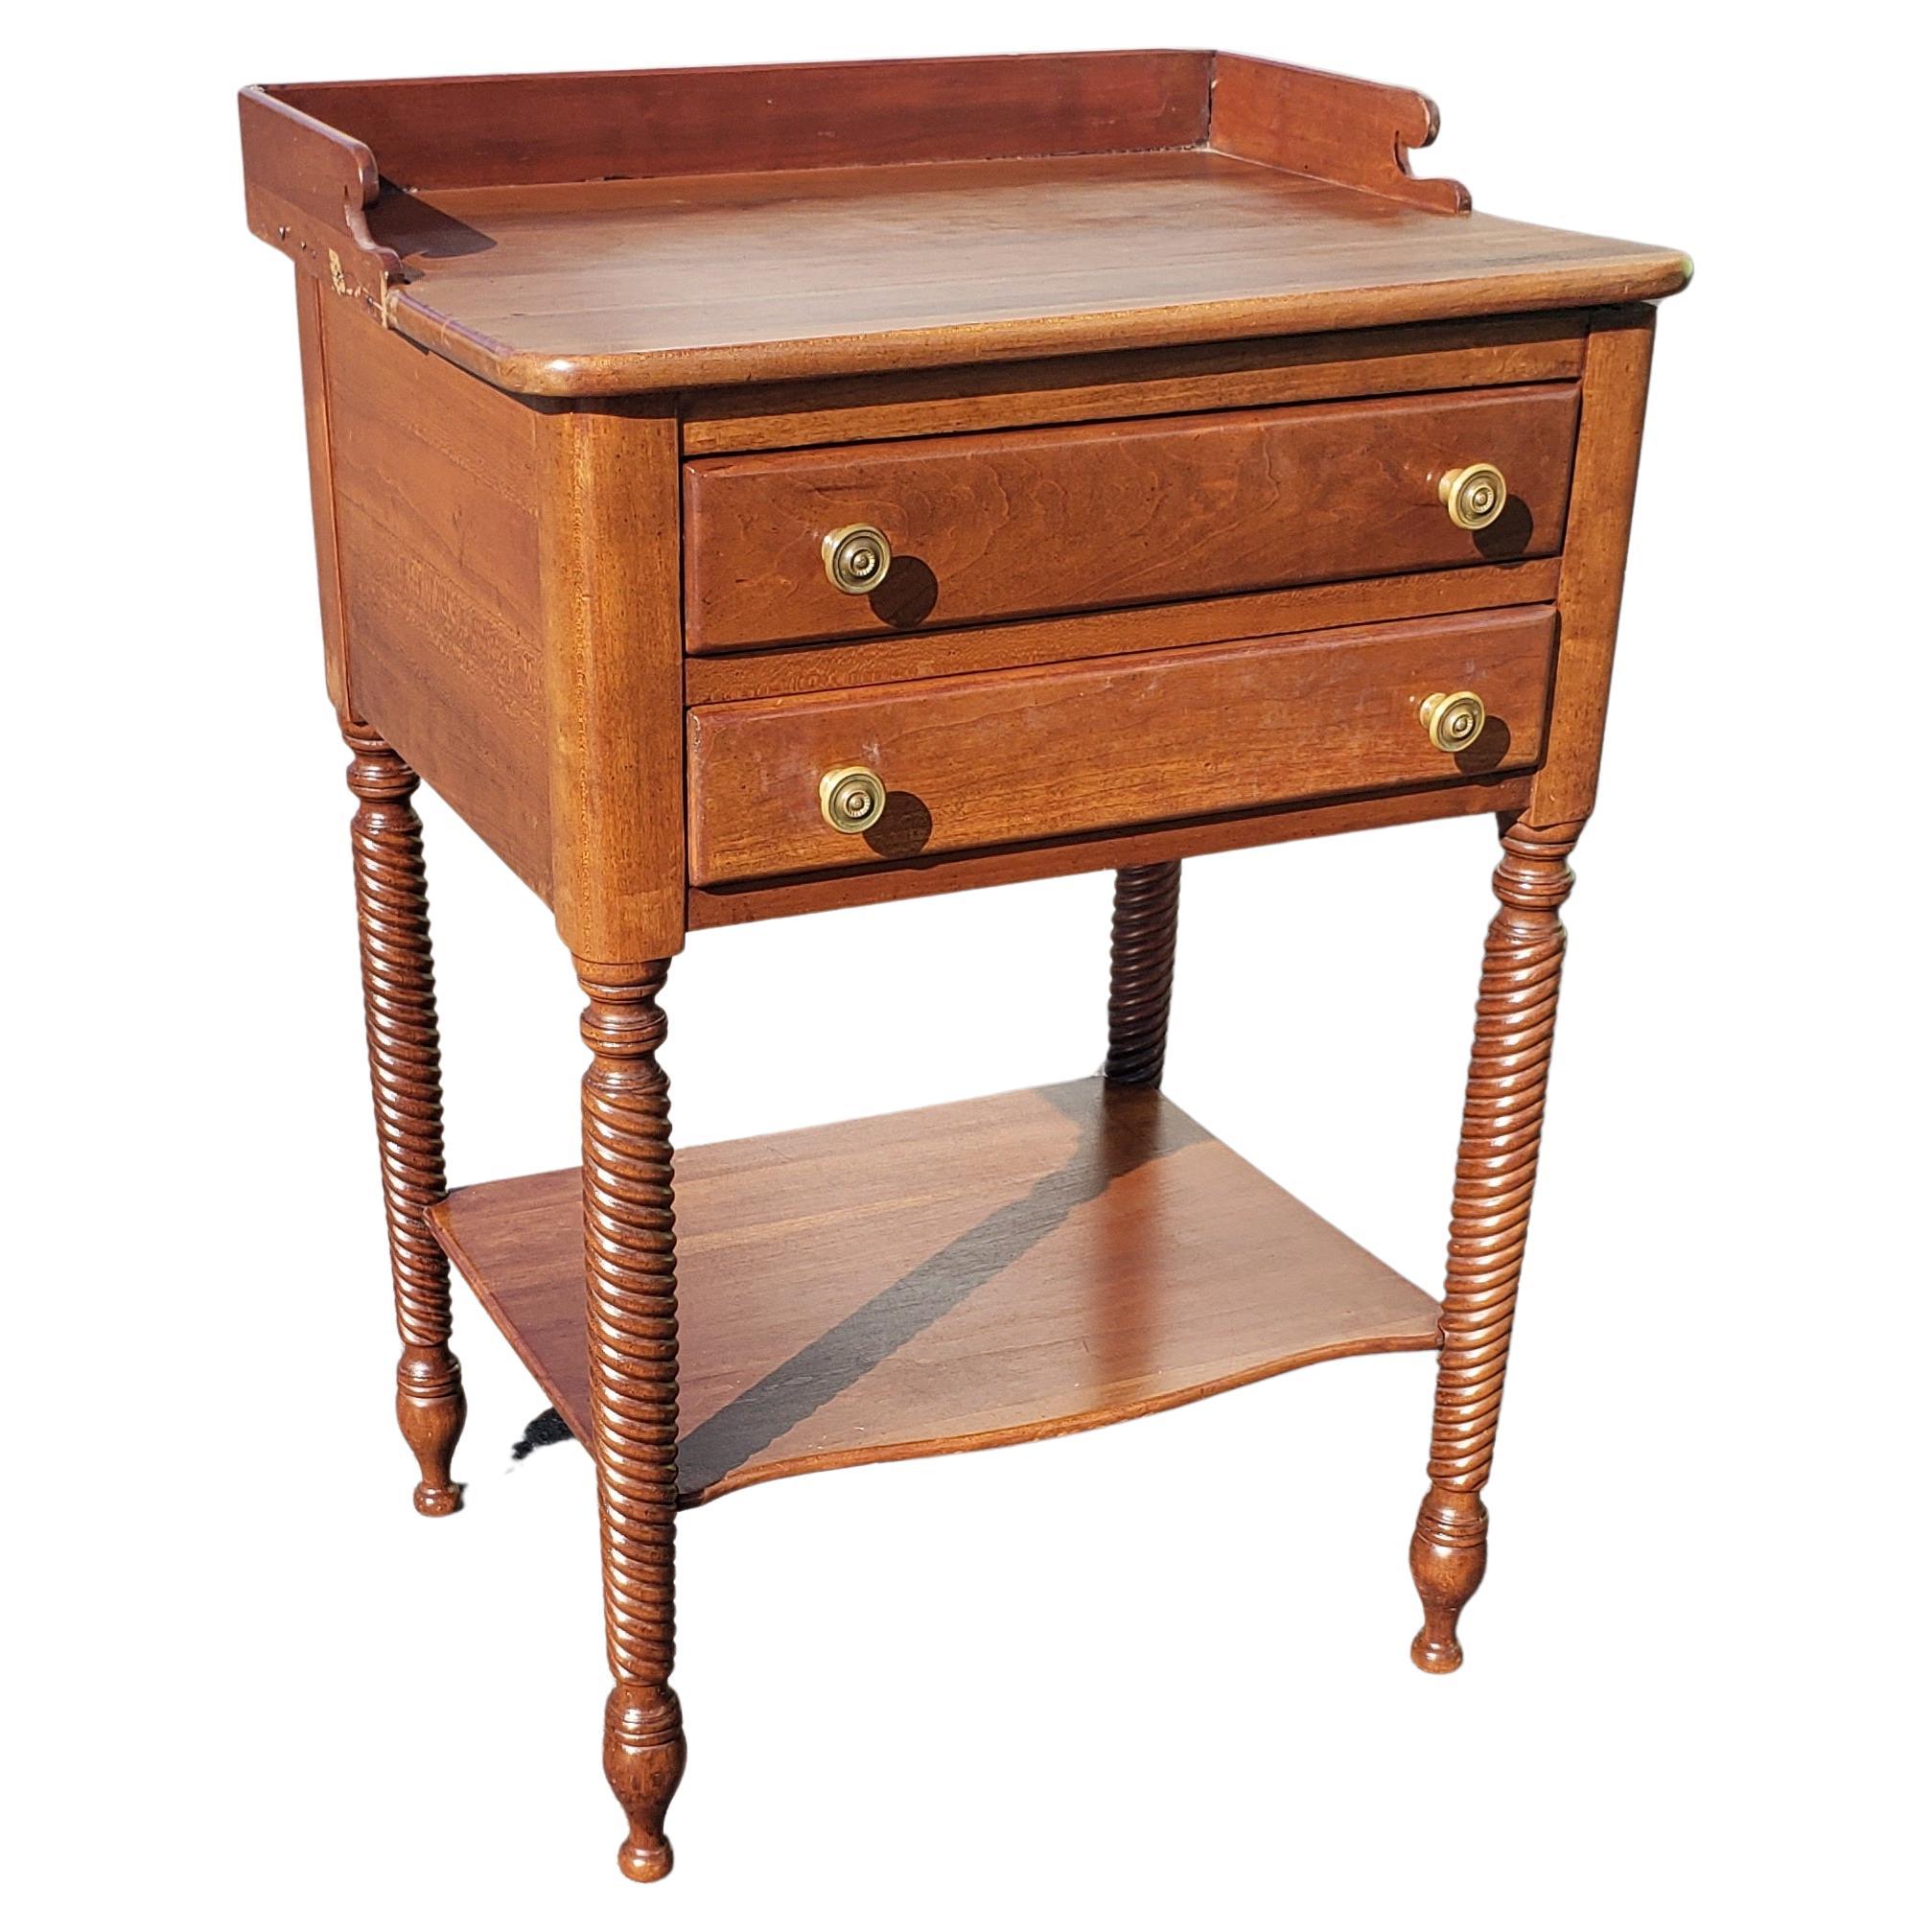 Stained 1950s Willett Furniture Wildwood Cherry Two-Drawer Side Table / Washstand